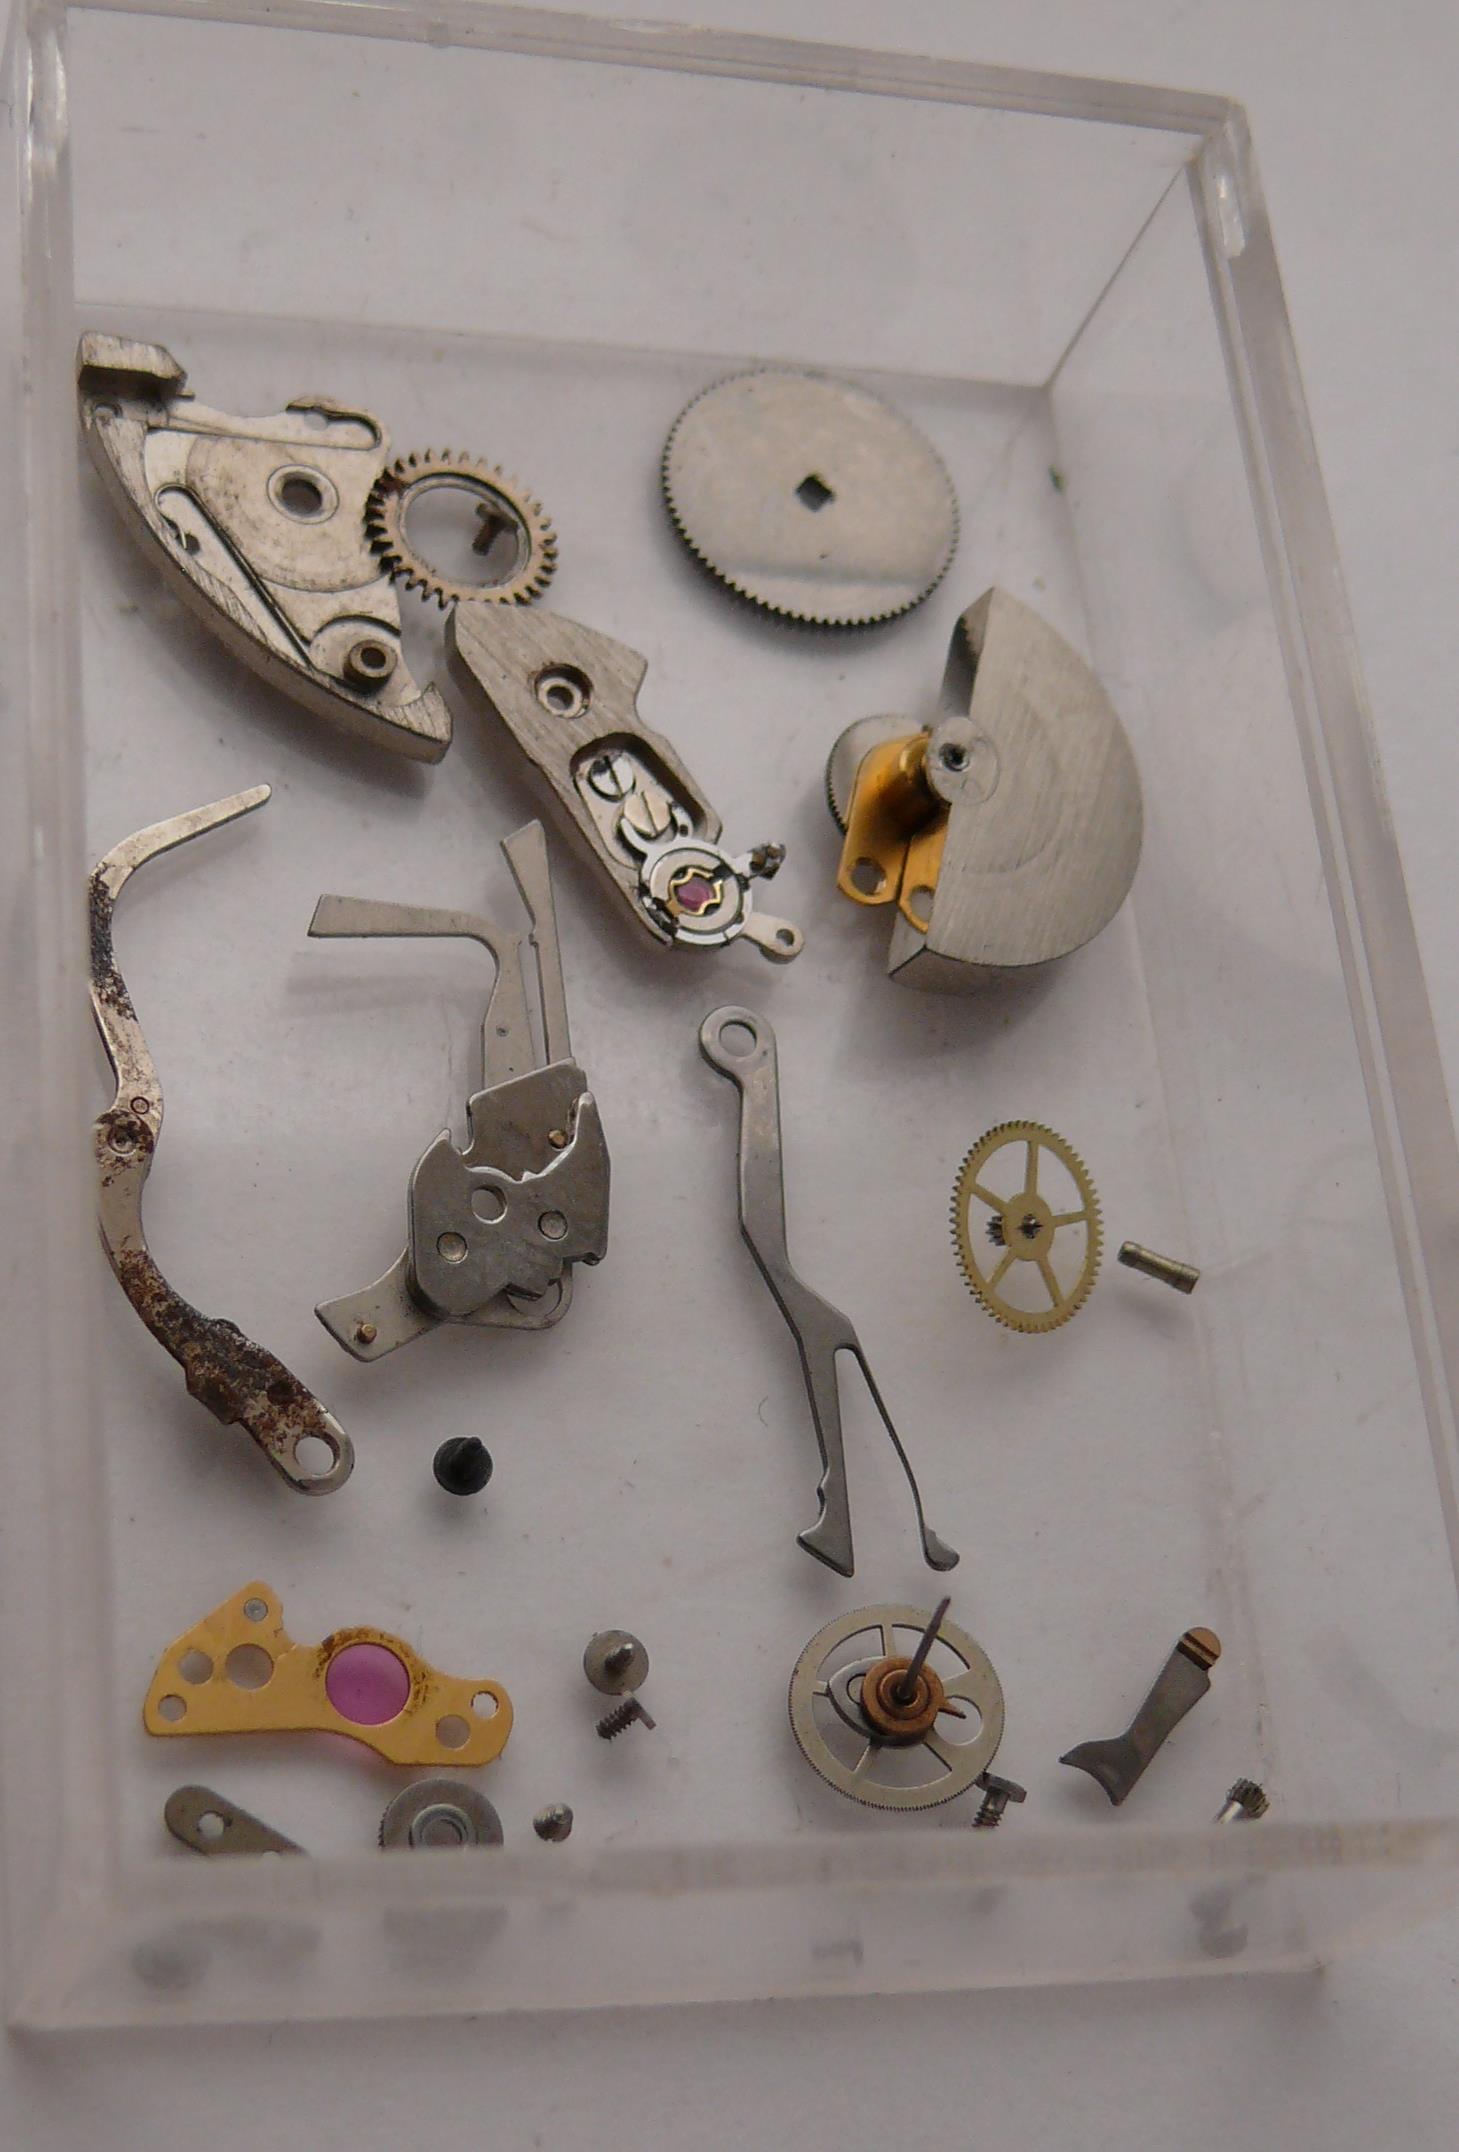 Assorted Vintage Breitling Chronograph Calibre 11 12 Movement Parts Job Lot. Suitable for projects. - Image 2 of 3